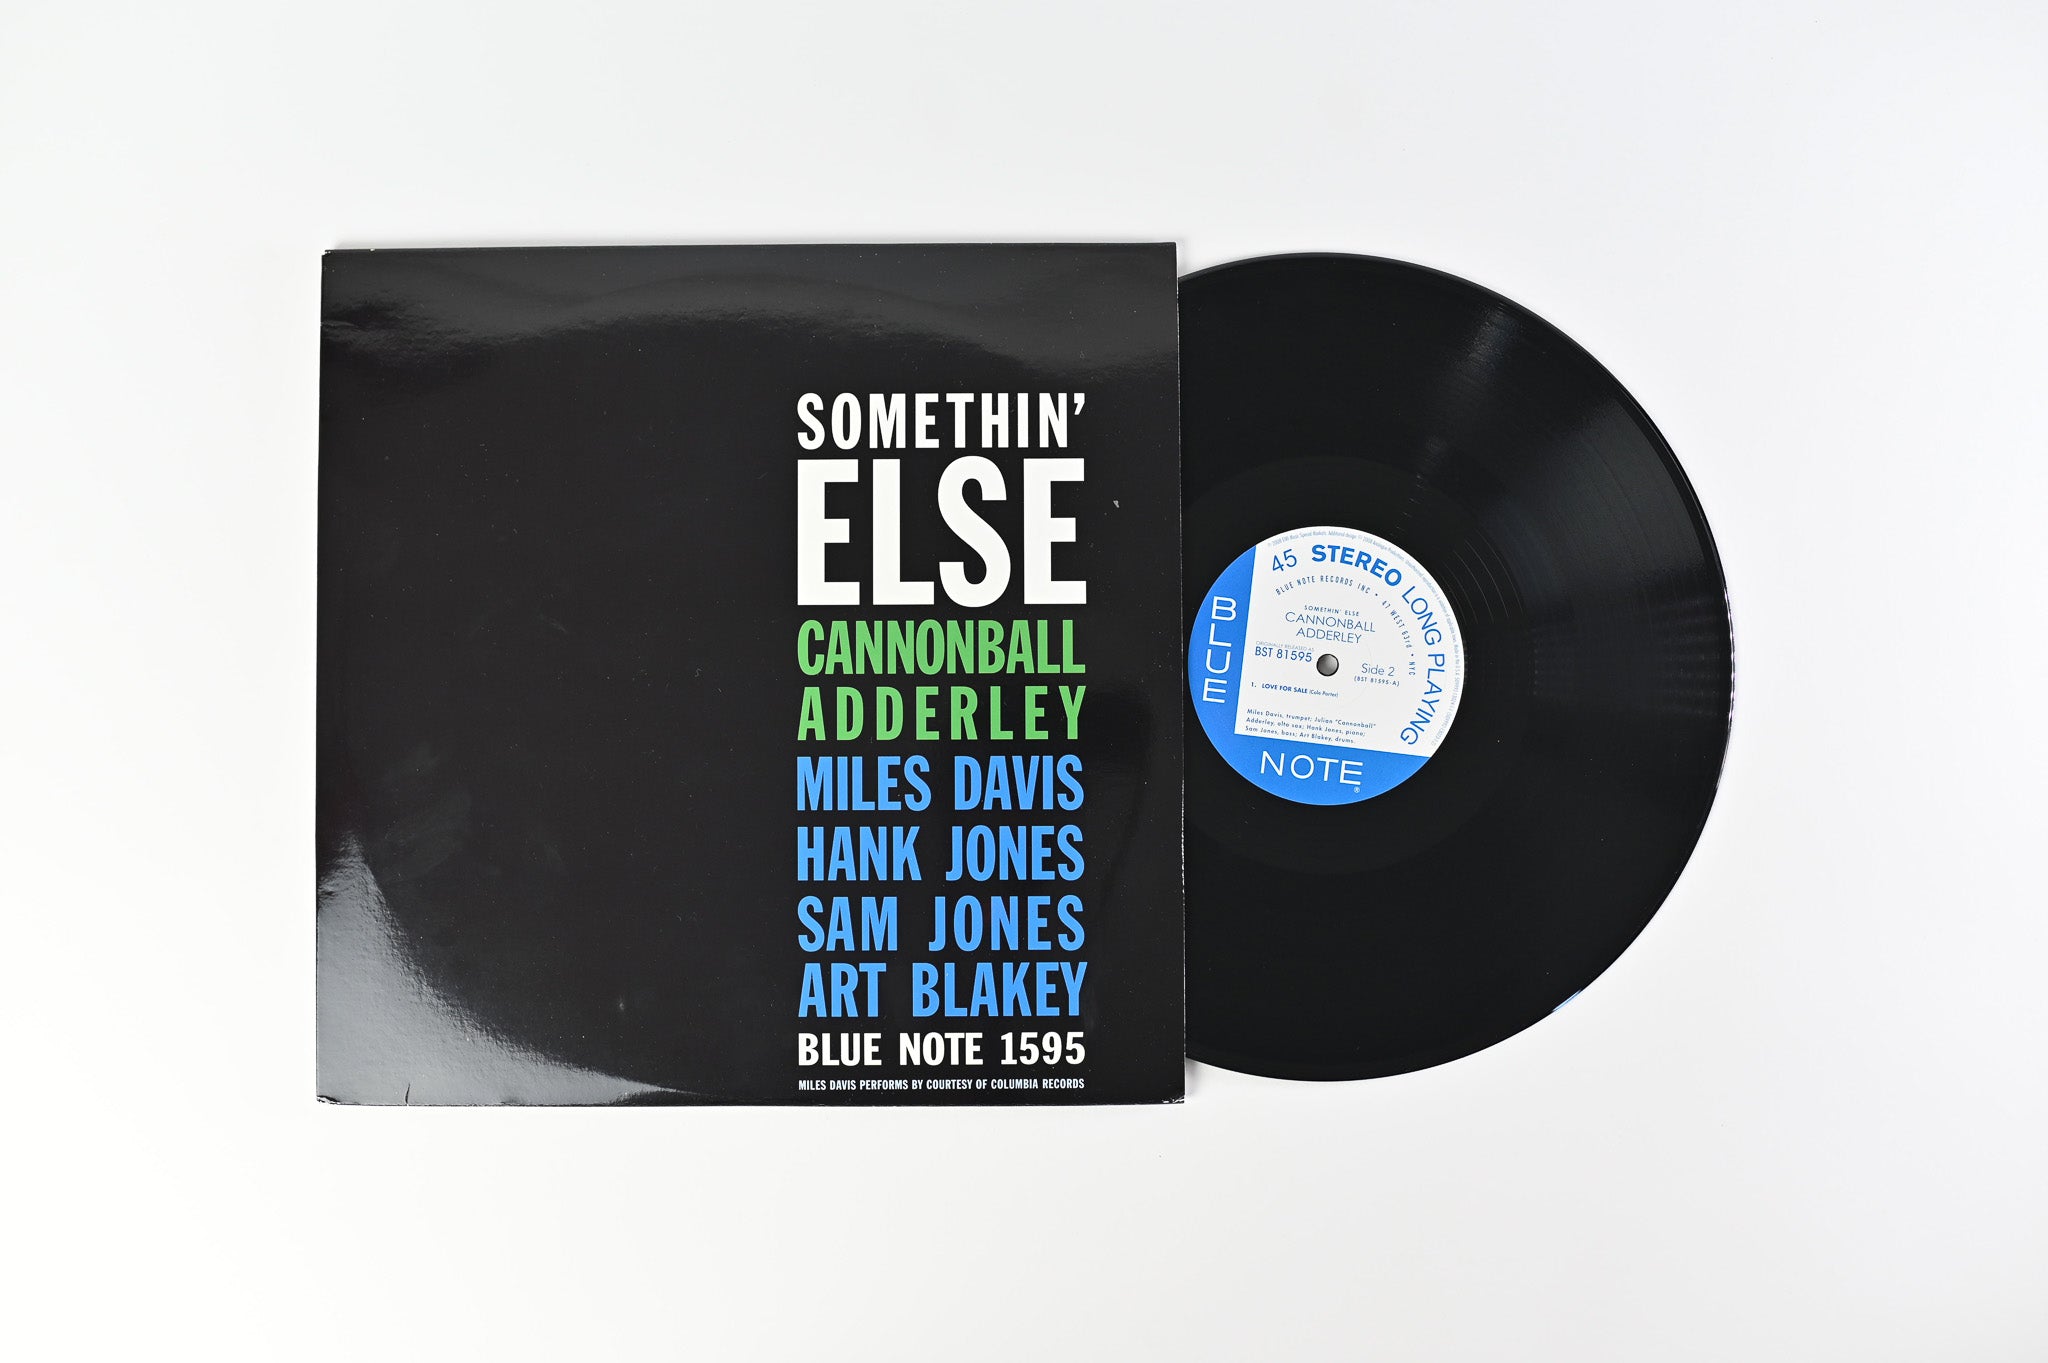 Cannonball Adderley - Somethin' Else on Blue Note Analogue Productions Reissue 45 RPM